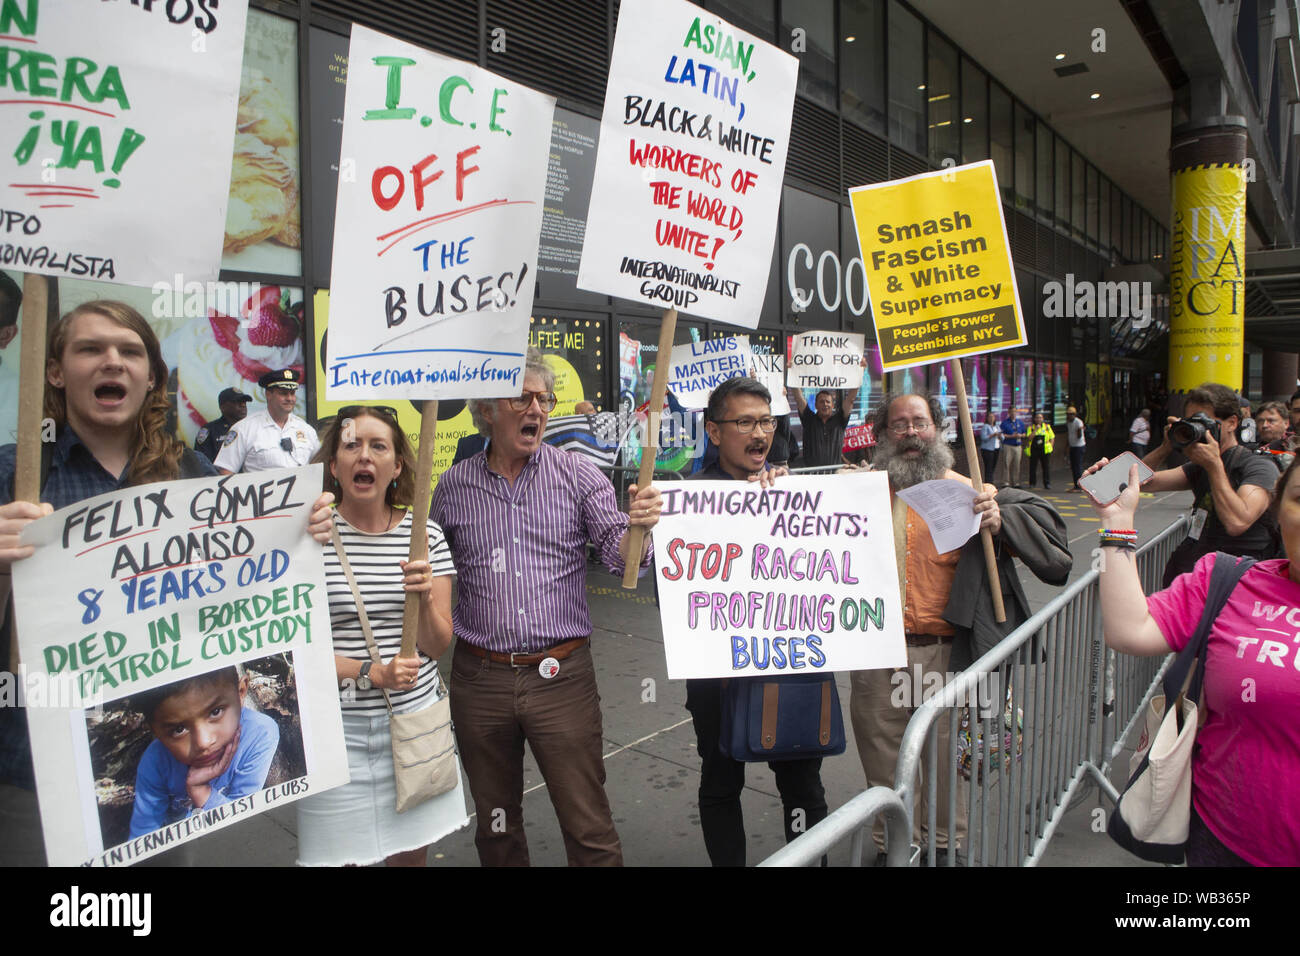 August 23, 2019: Demonstrators are shown during a protest against Greyhound Corporation and ICE (Immigration Customs and Enforcement) at the Port Authority Bus Terminal on 42nd and 8th Avenue in New York, New York. About 100 activists from a coalition of groups including FIRE (Fight For Immigrant Refugees Everywhere) protested Greyhound allowing ICE agents to board their busses 'searching for migrants,'' officials said, .Far right are Anti-demonstrators and Trump supporters Credit: Brian Branch Price/ZUMA Wire/Alamy Live News Stock Photo